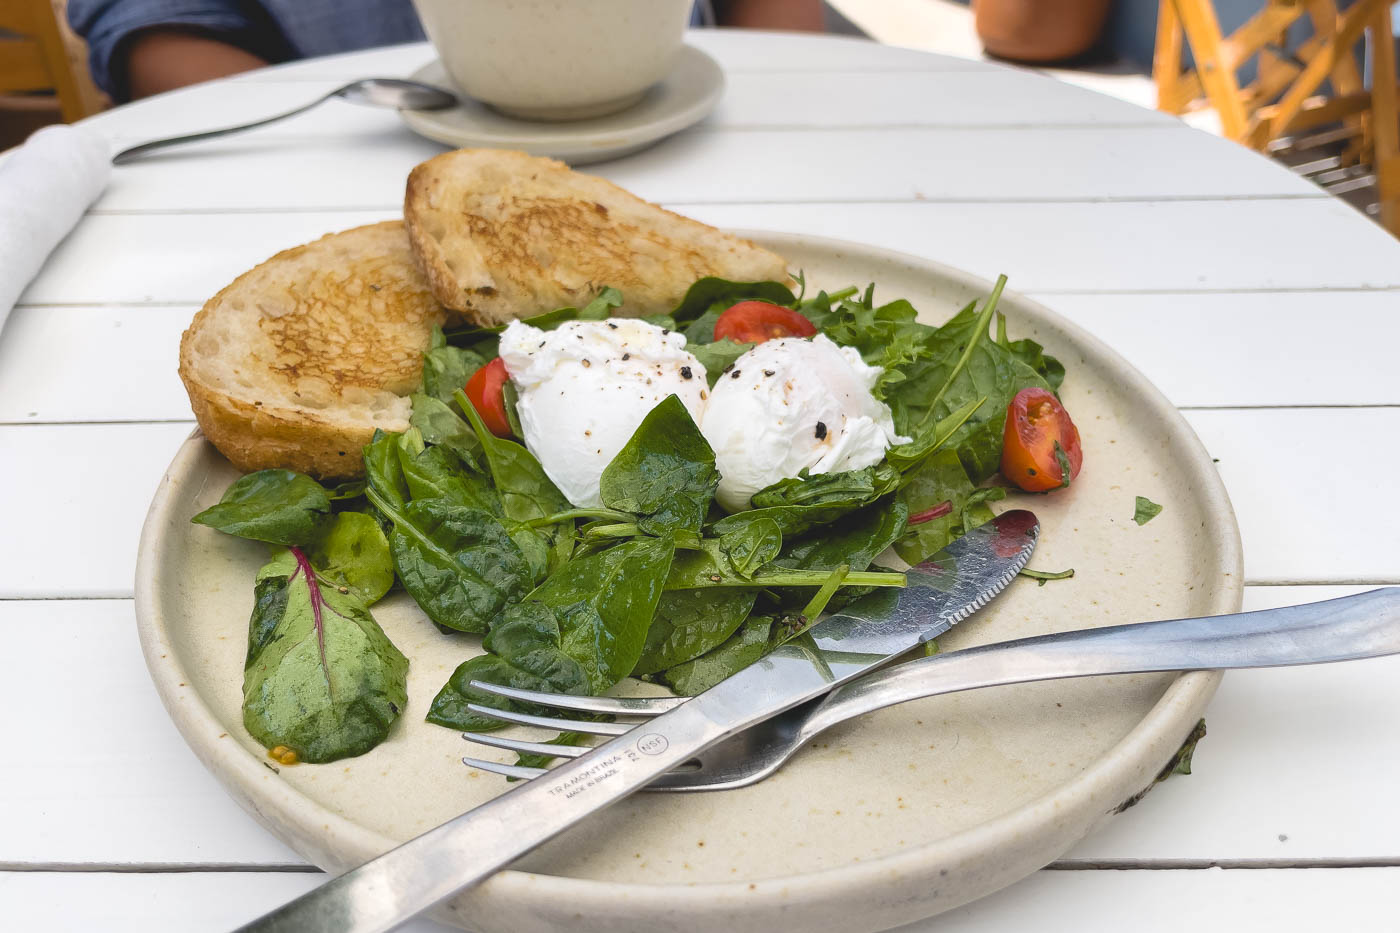 A beautifully arranged plate of sourdough toast, spinach salad and two perfectly poached eggs on top at the restaurant Miscelanea. 